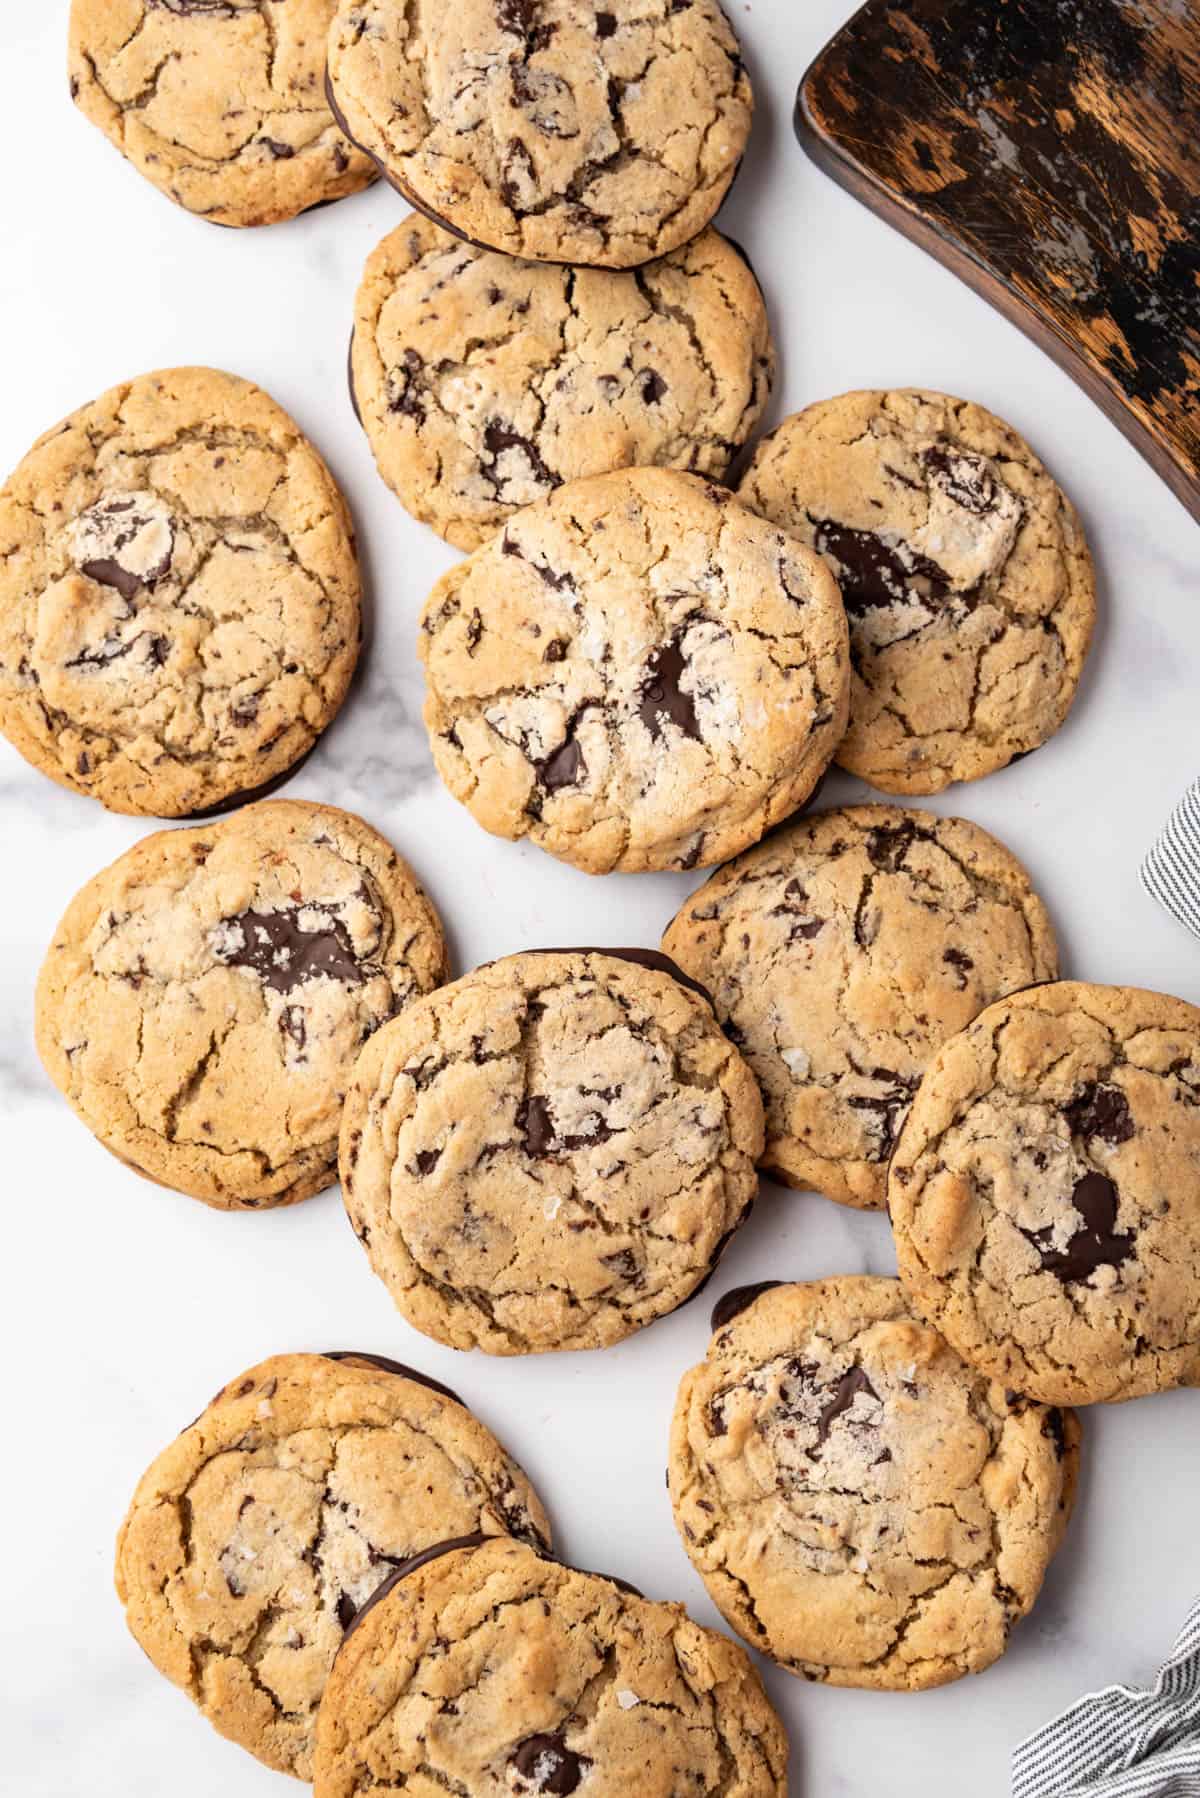 An overhead image of Jacques Torres chocolate chip cookies scattered on a white marble surface.